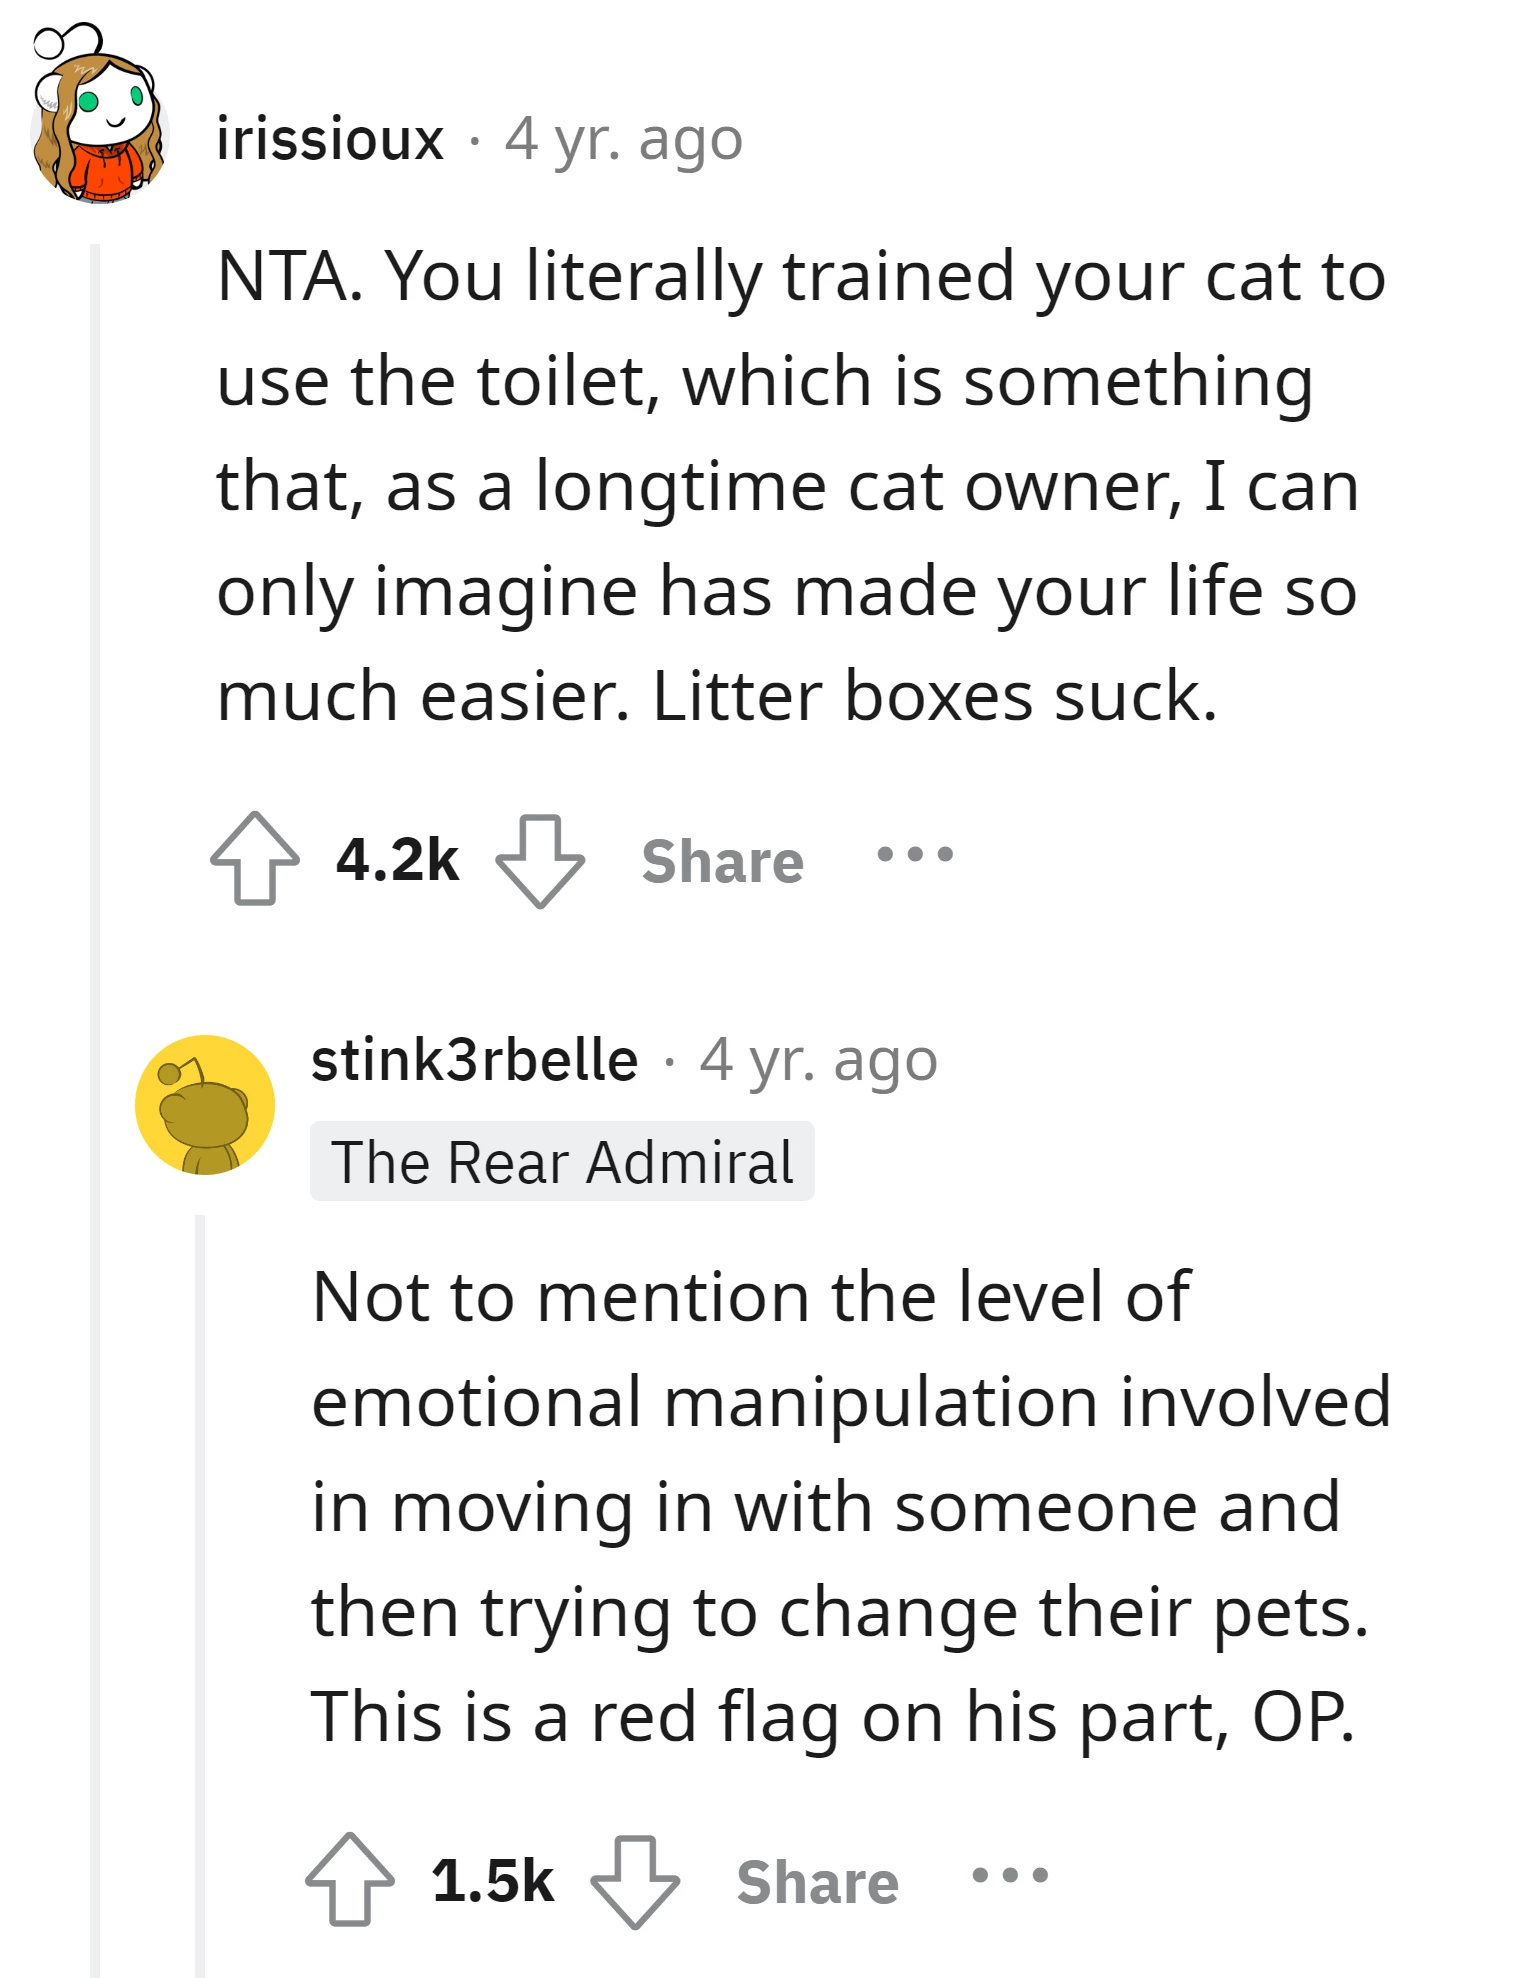 Commenter supports the OP's choice of toilet training for her cat